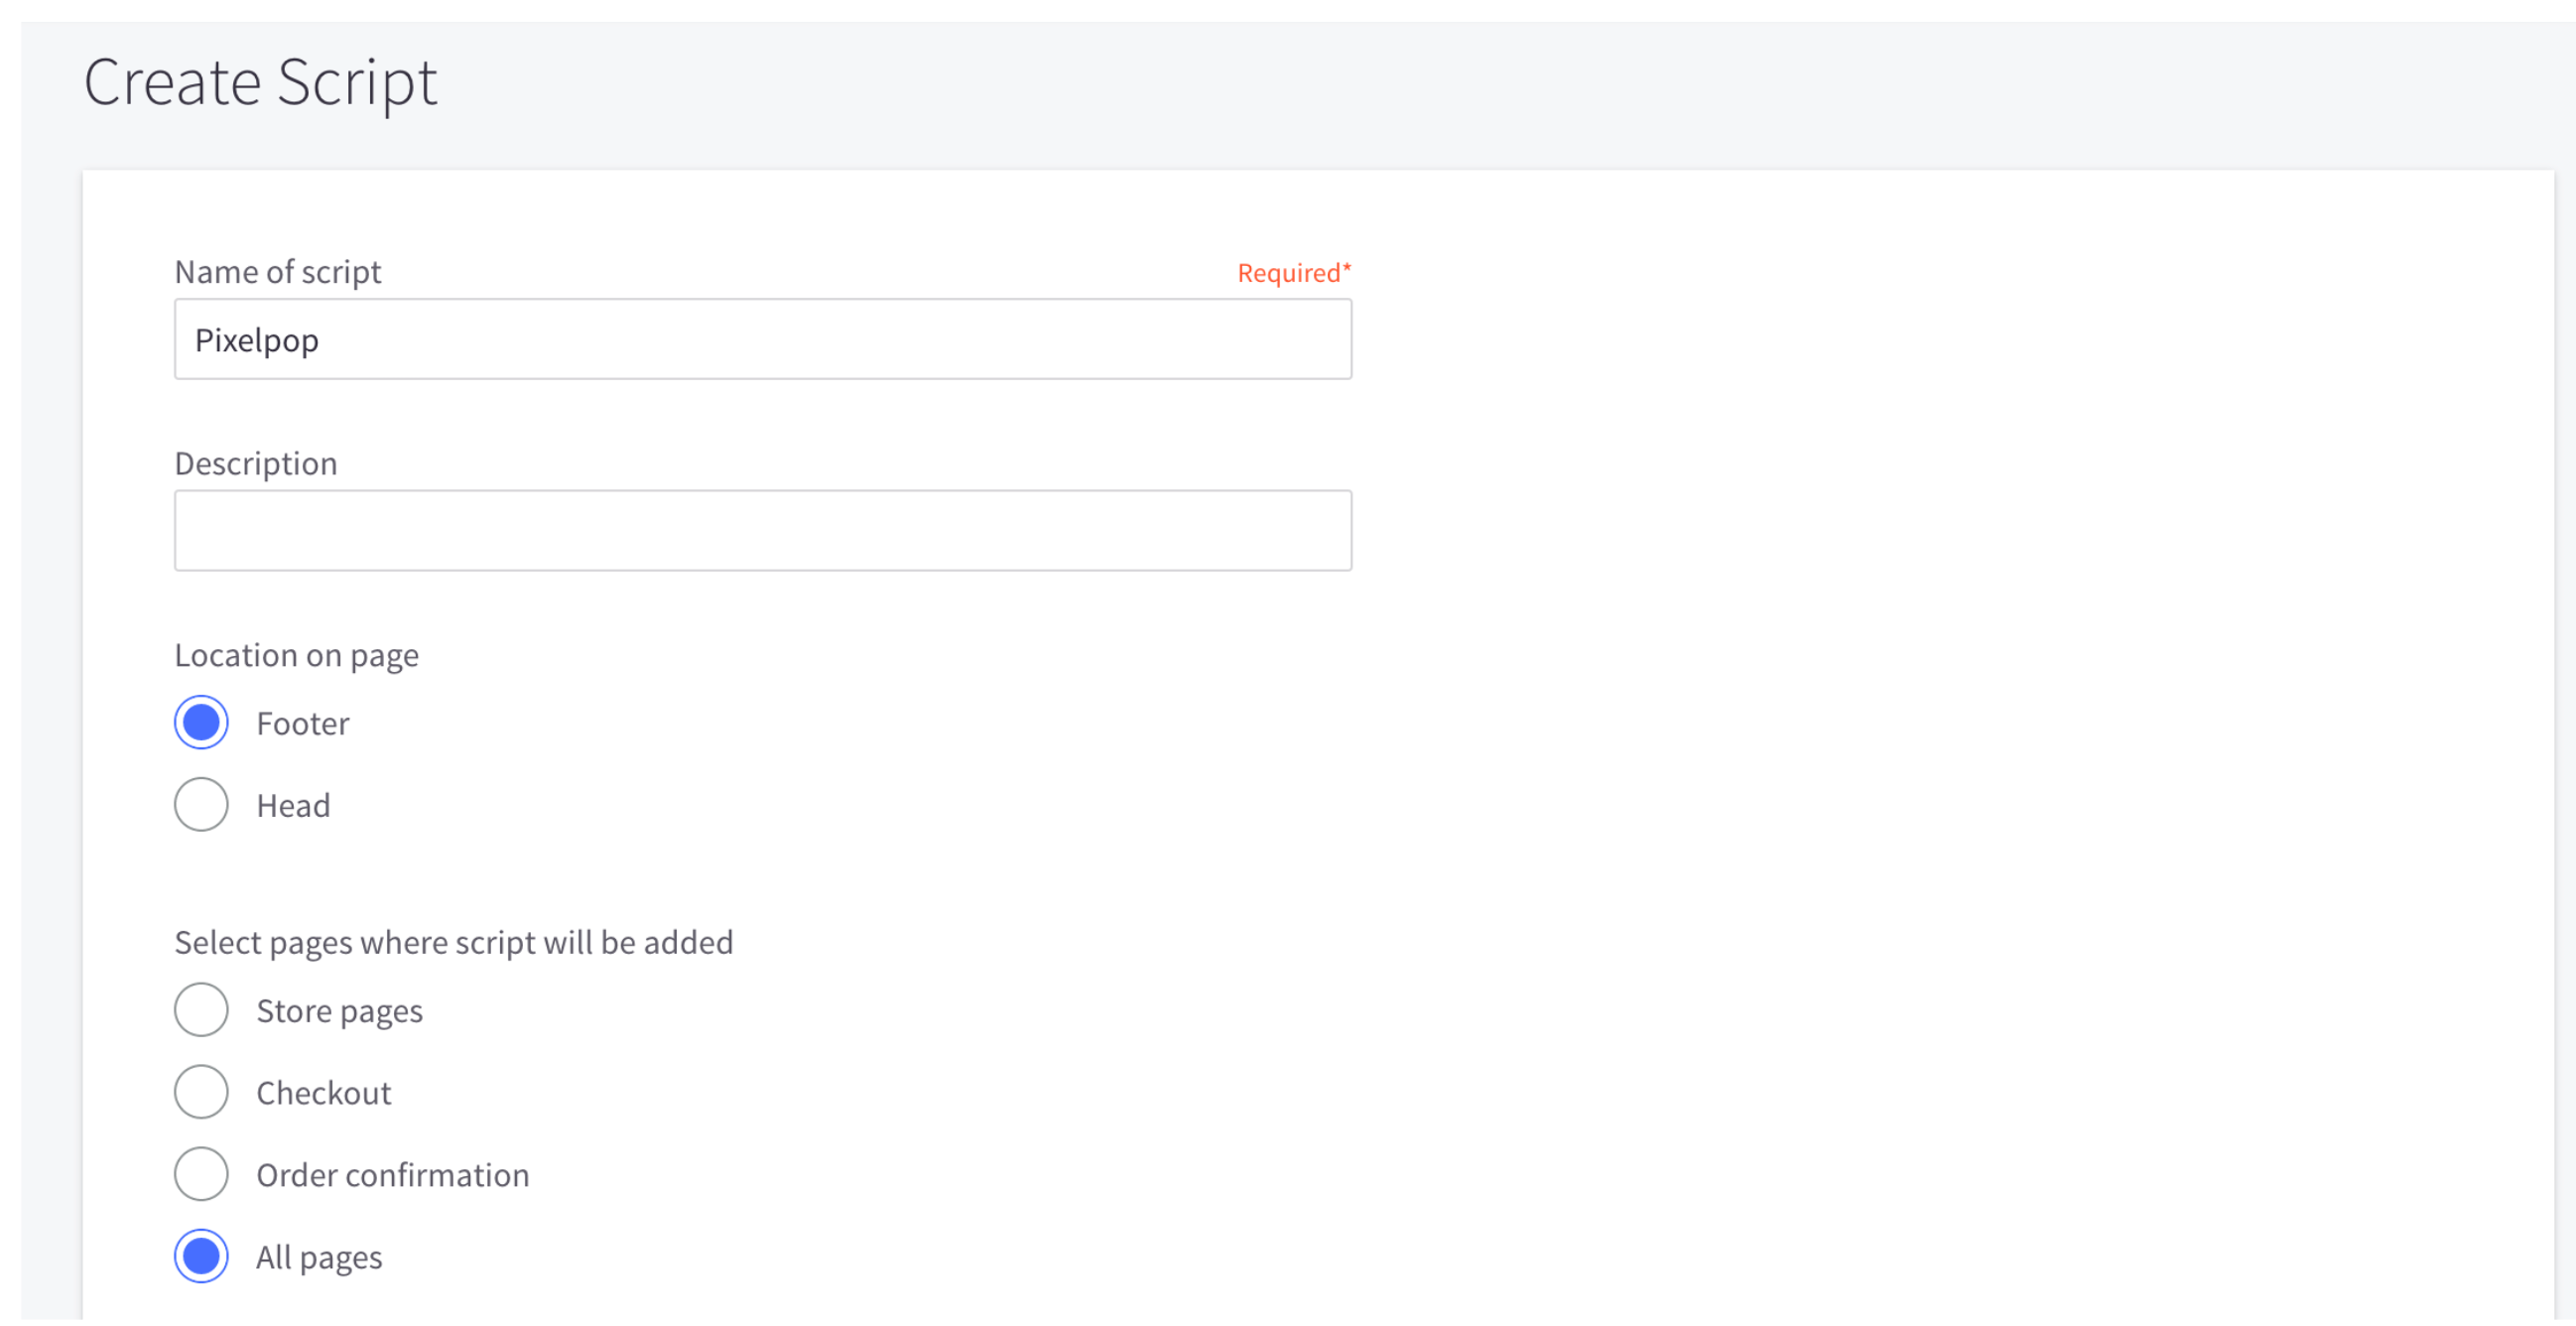 Settings within BigCommerce to create a script showing that the Footer and All pages options must be selected.